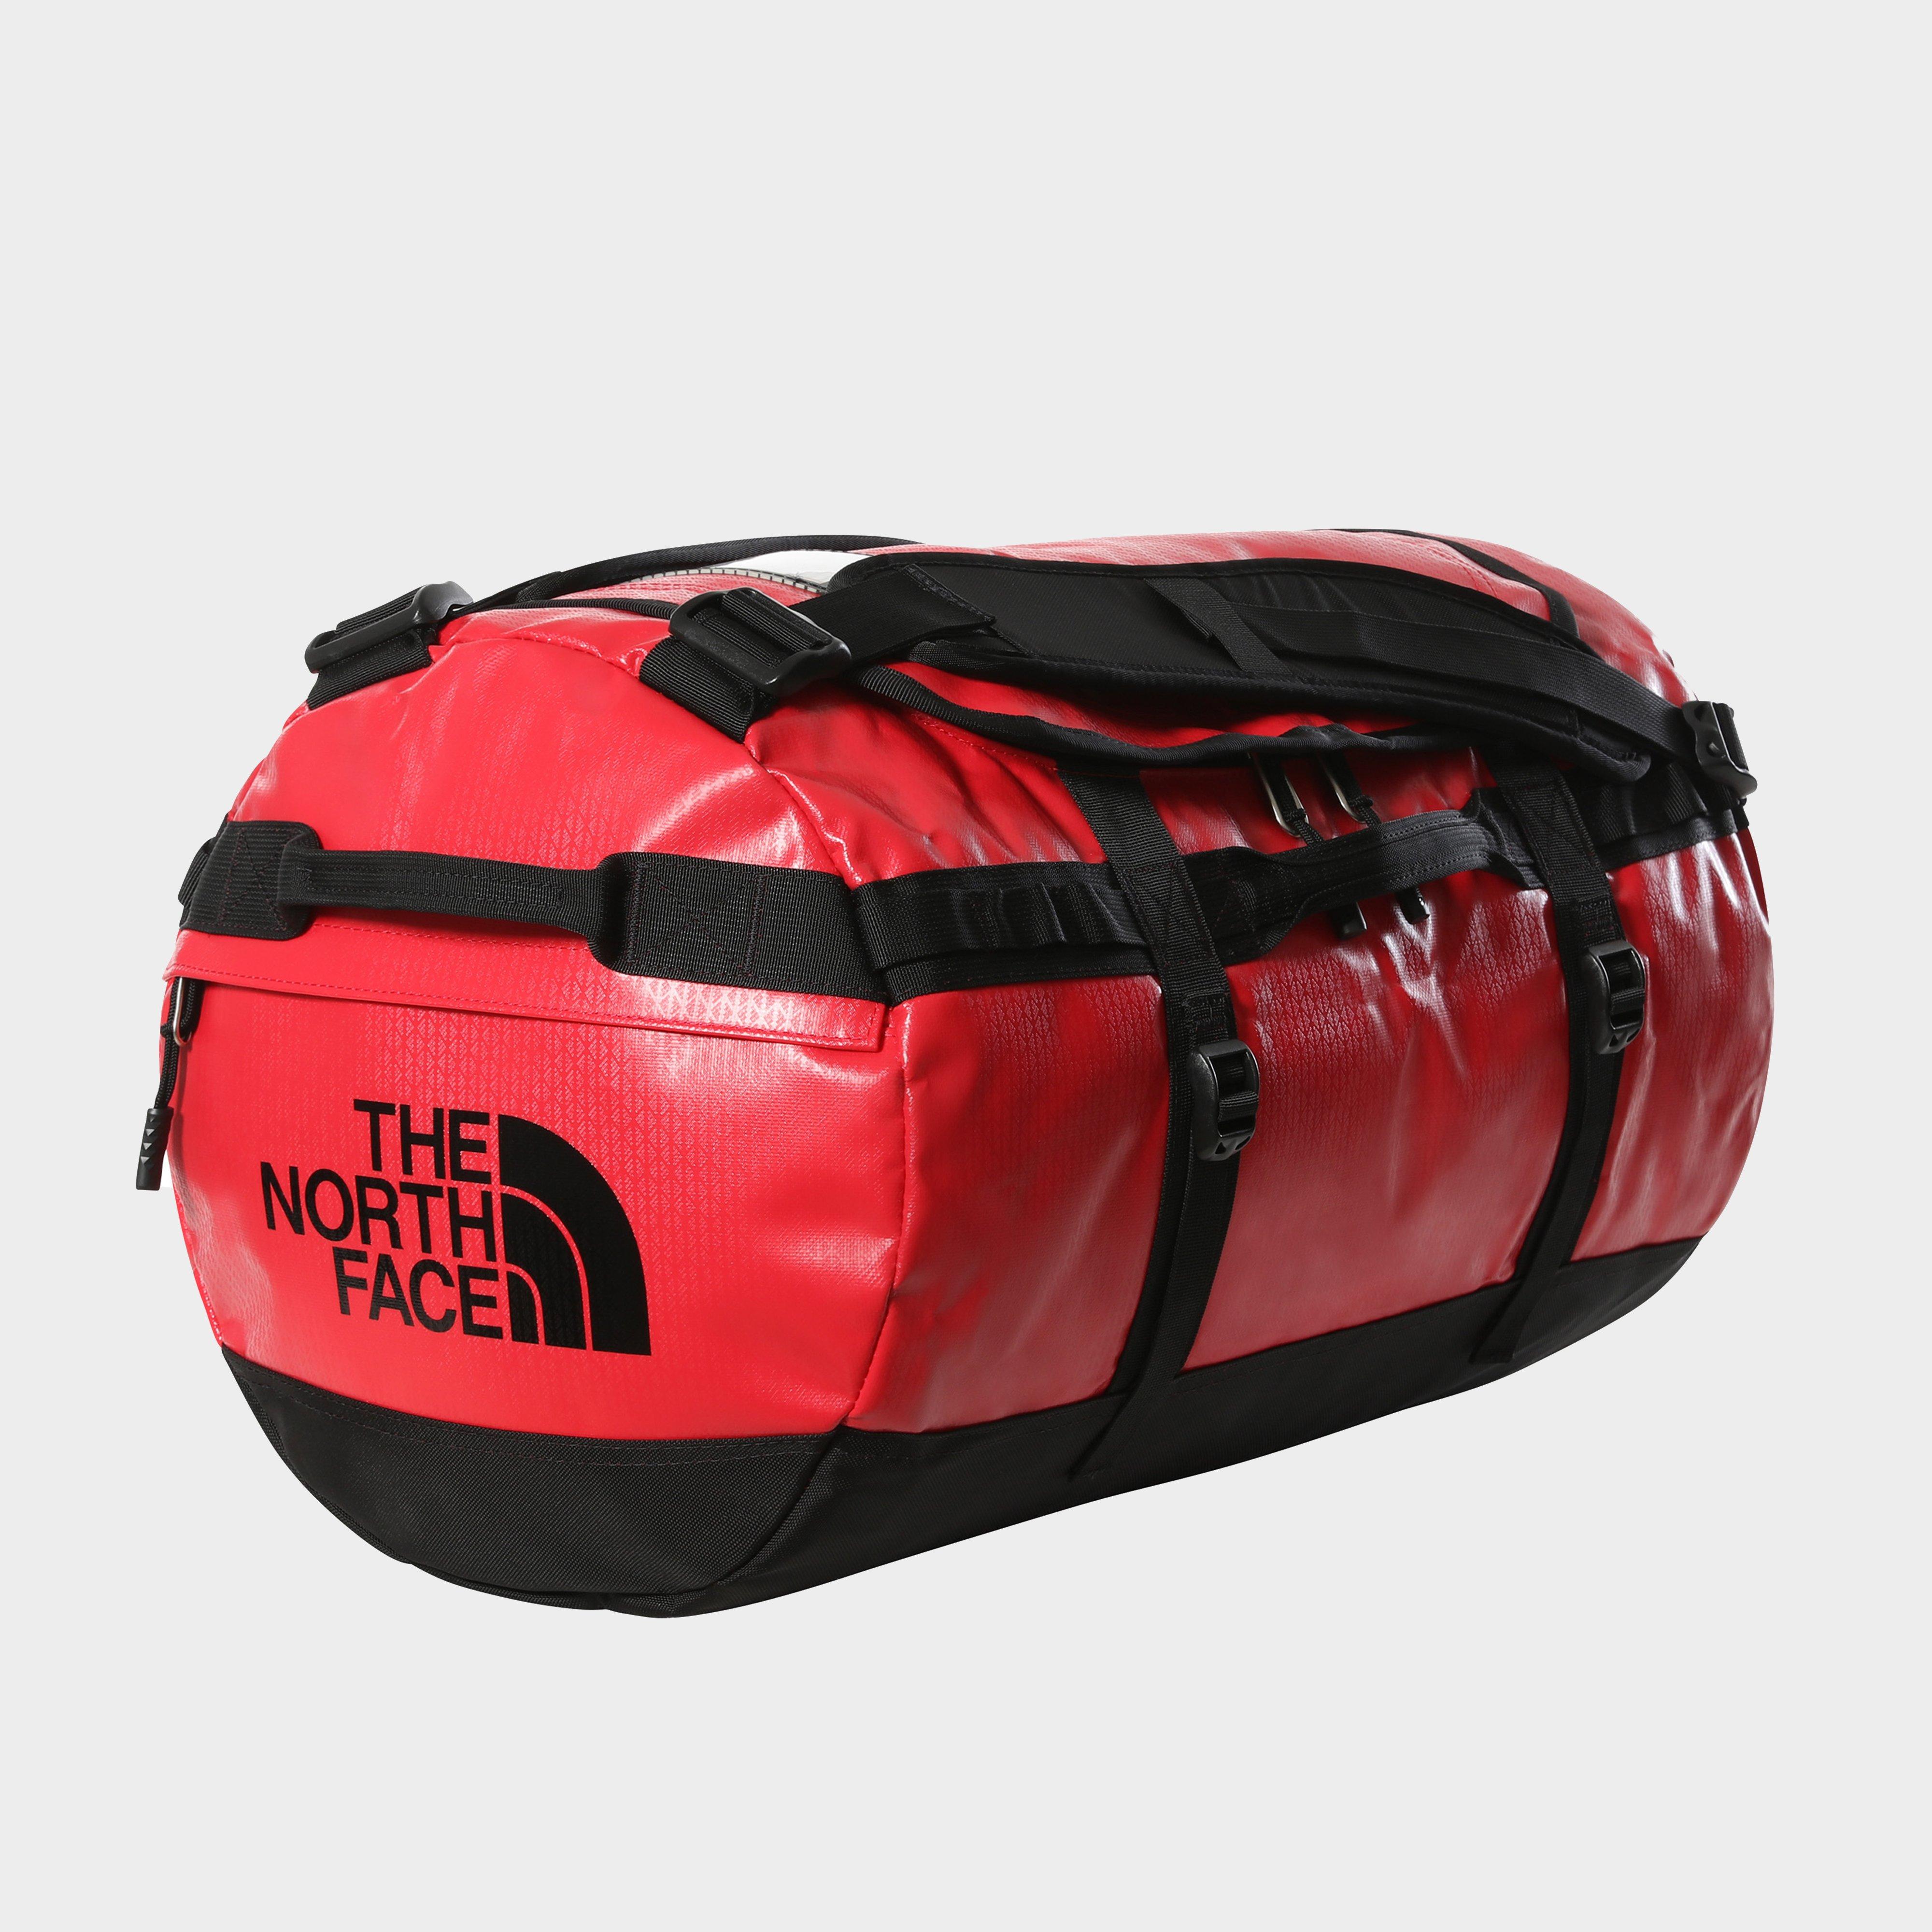  The North Face Base Camp Duffel Bag (Small), Red